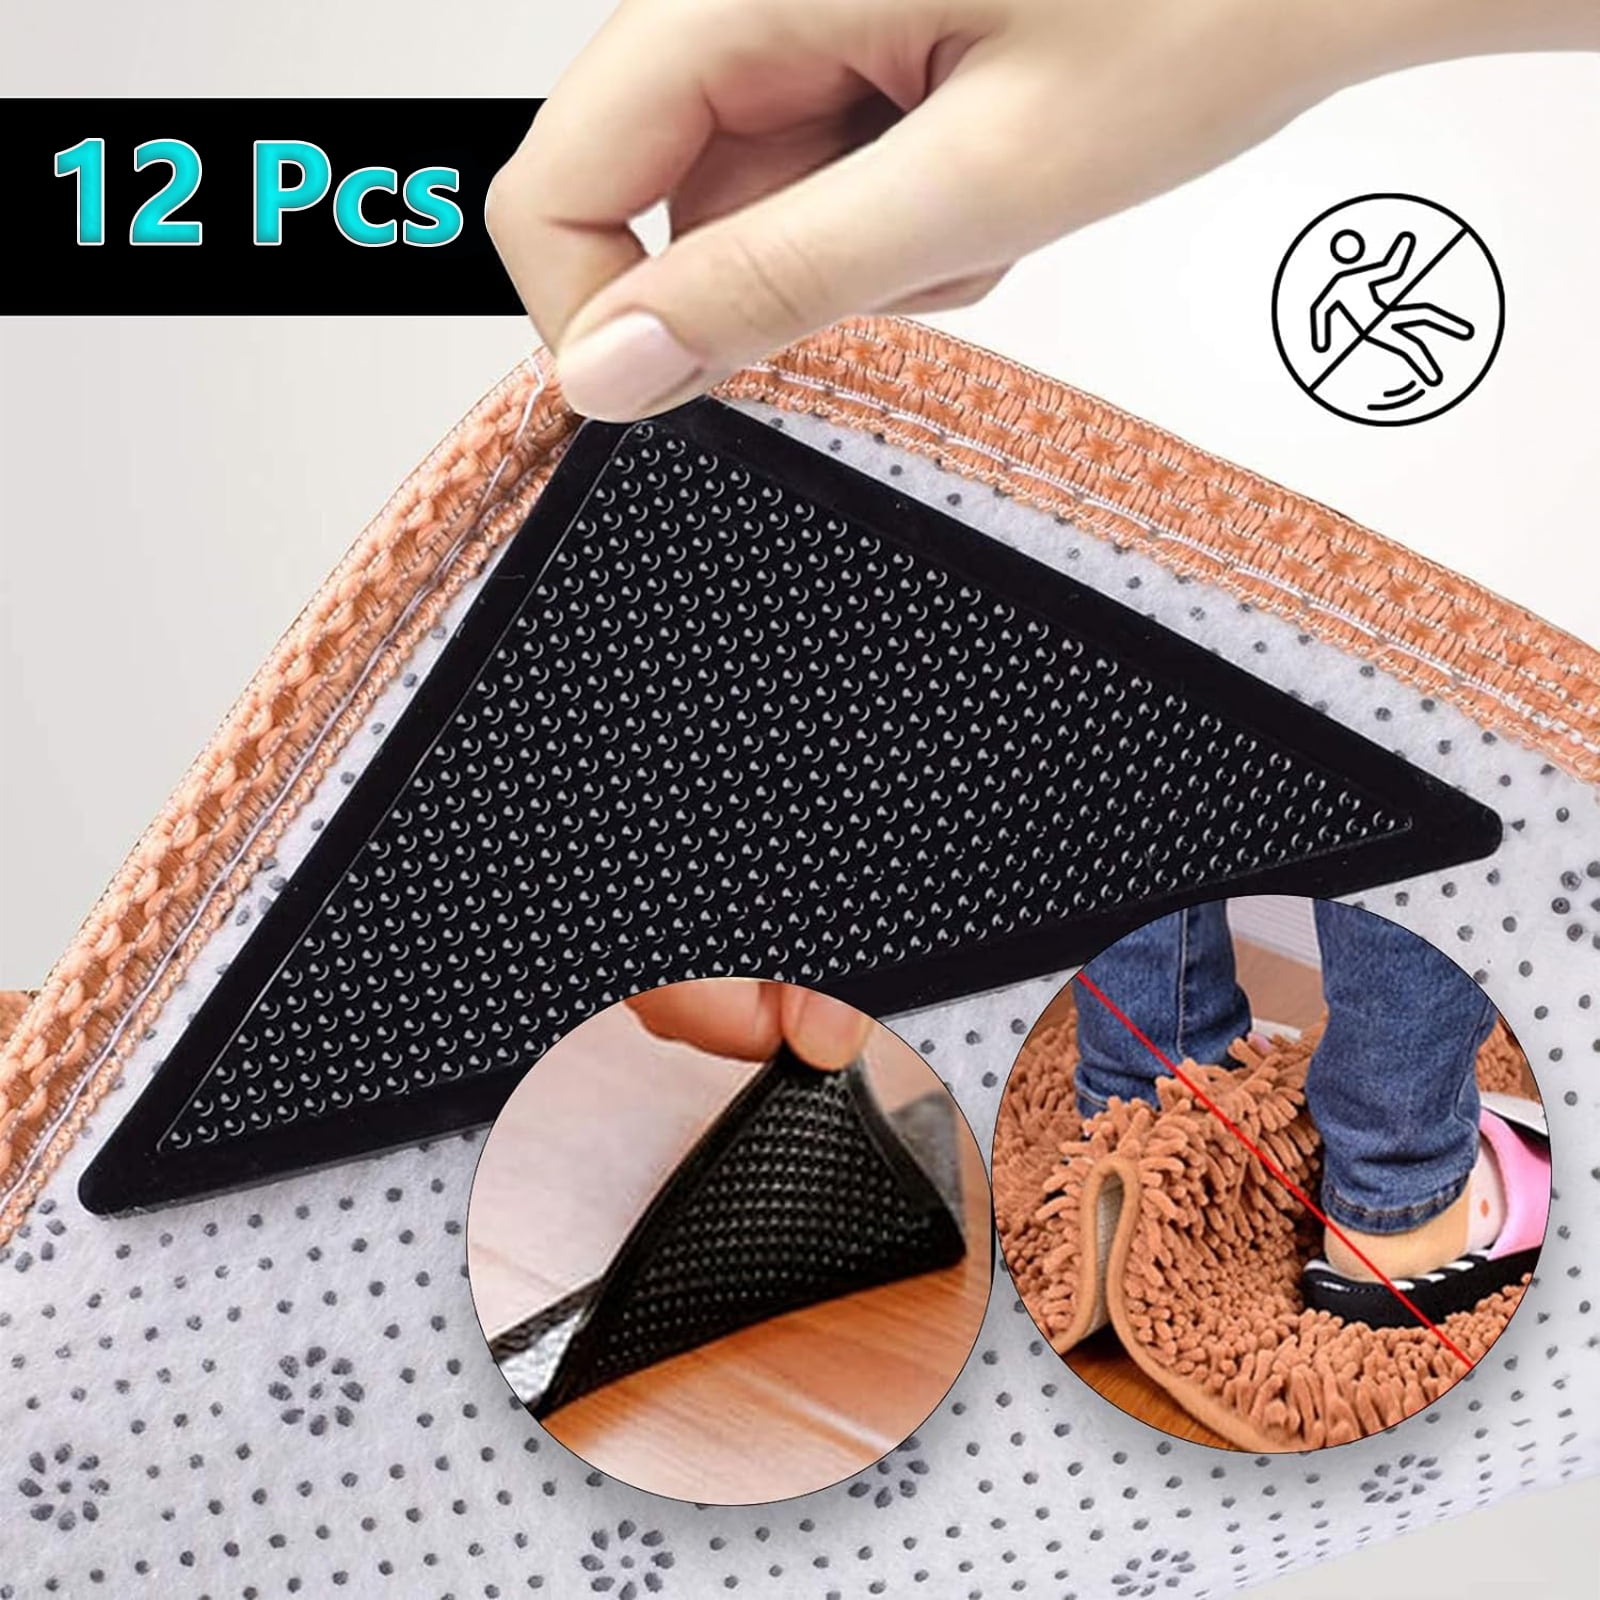 12 Pcs Rug Grippers, GALAFOKI Rug Tape, Washable Rug Corner Grip, Reusable  Durable Non Slips Carpet Pad for Home Area Rugs, Black 